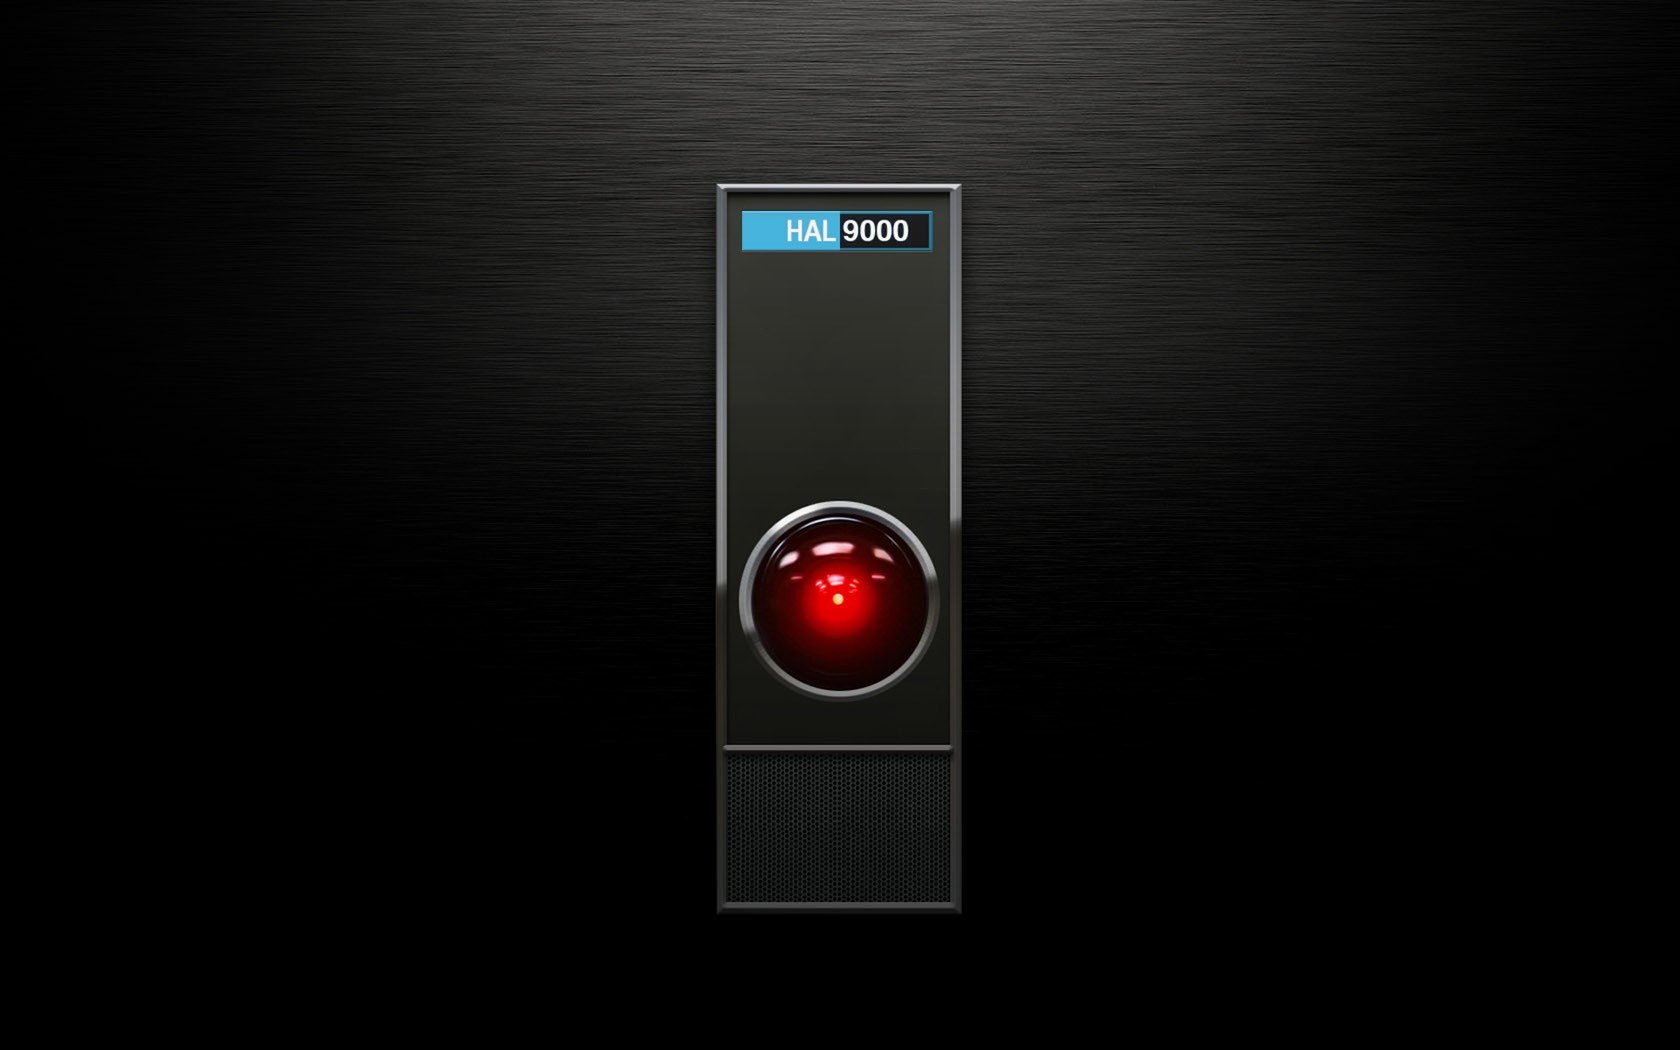 General 1680x1050 HAL 9000 2001: A Space Odyssey movies science fiction computer